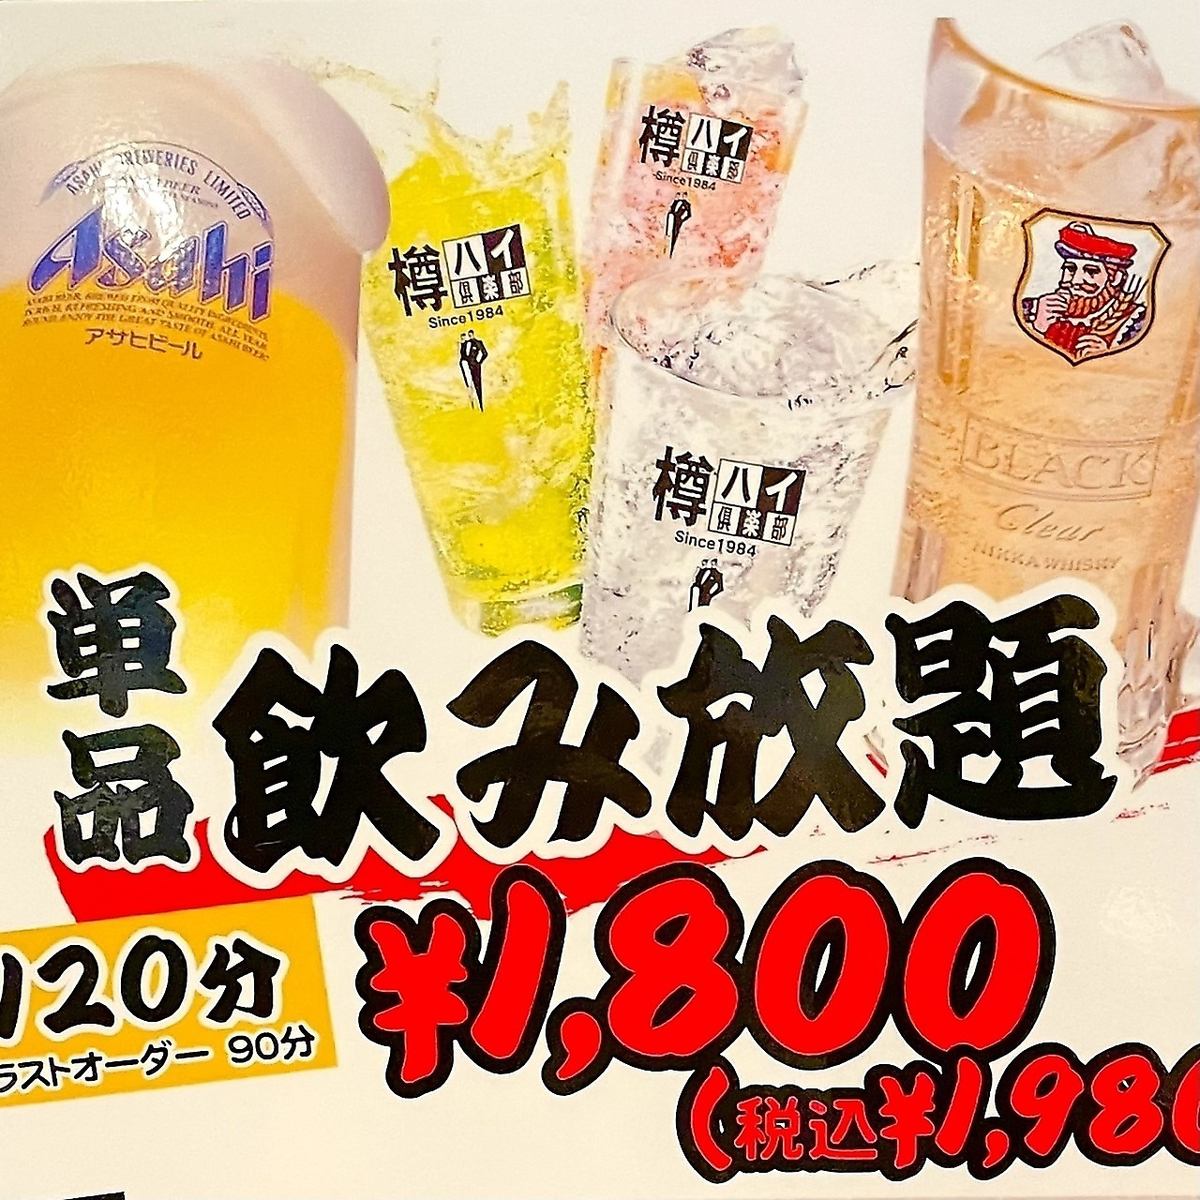 [☆All-you-can-drink single item 1980 yen☆] Draft beer, chuhai, cocktails, etc. available♪